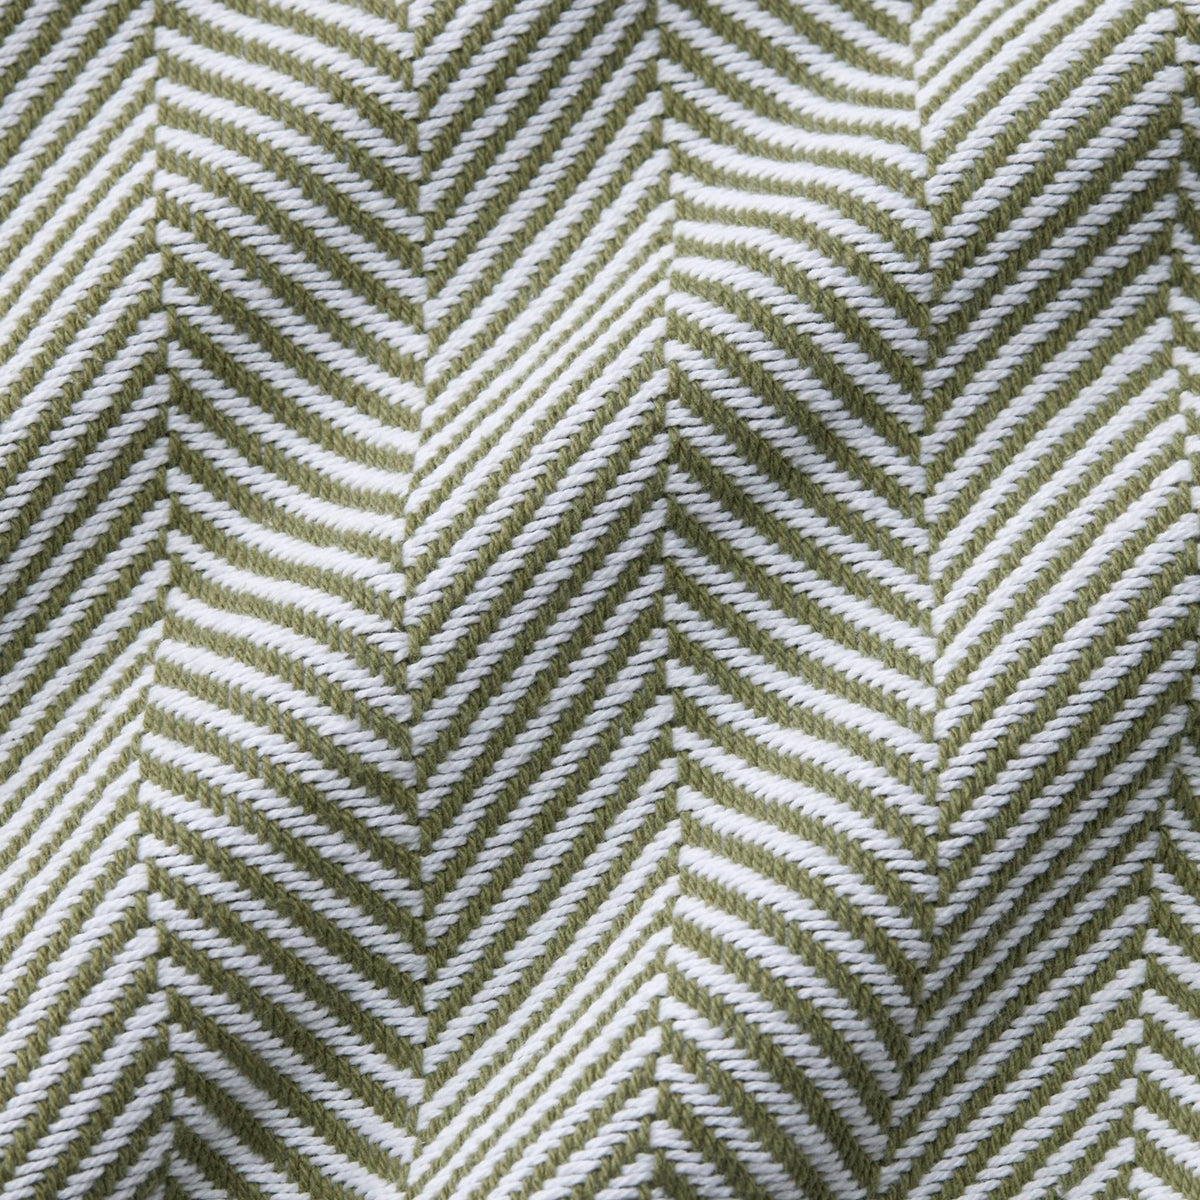 Swatch Sample of Sferra Camilo Blanket in White/Willow